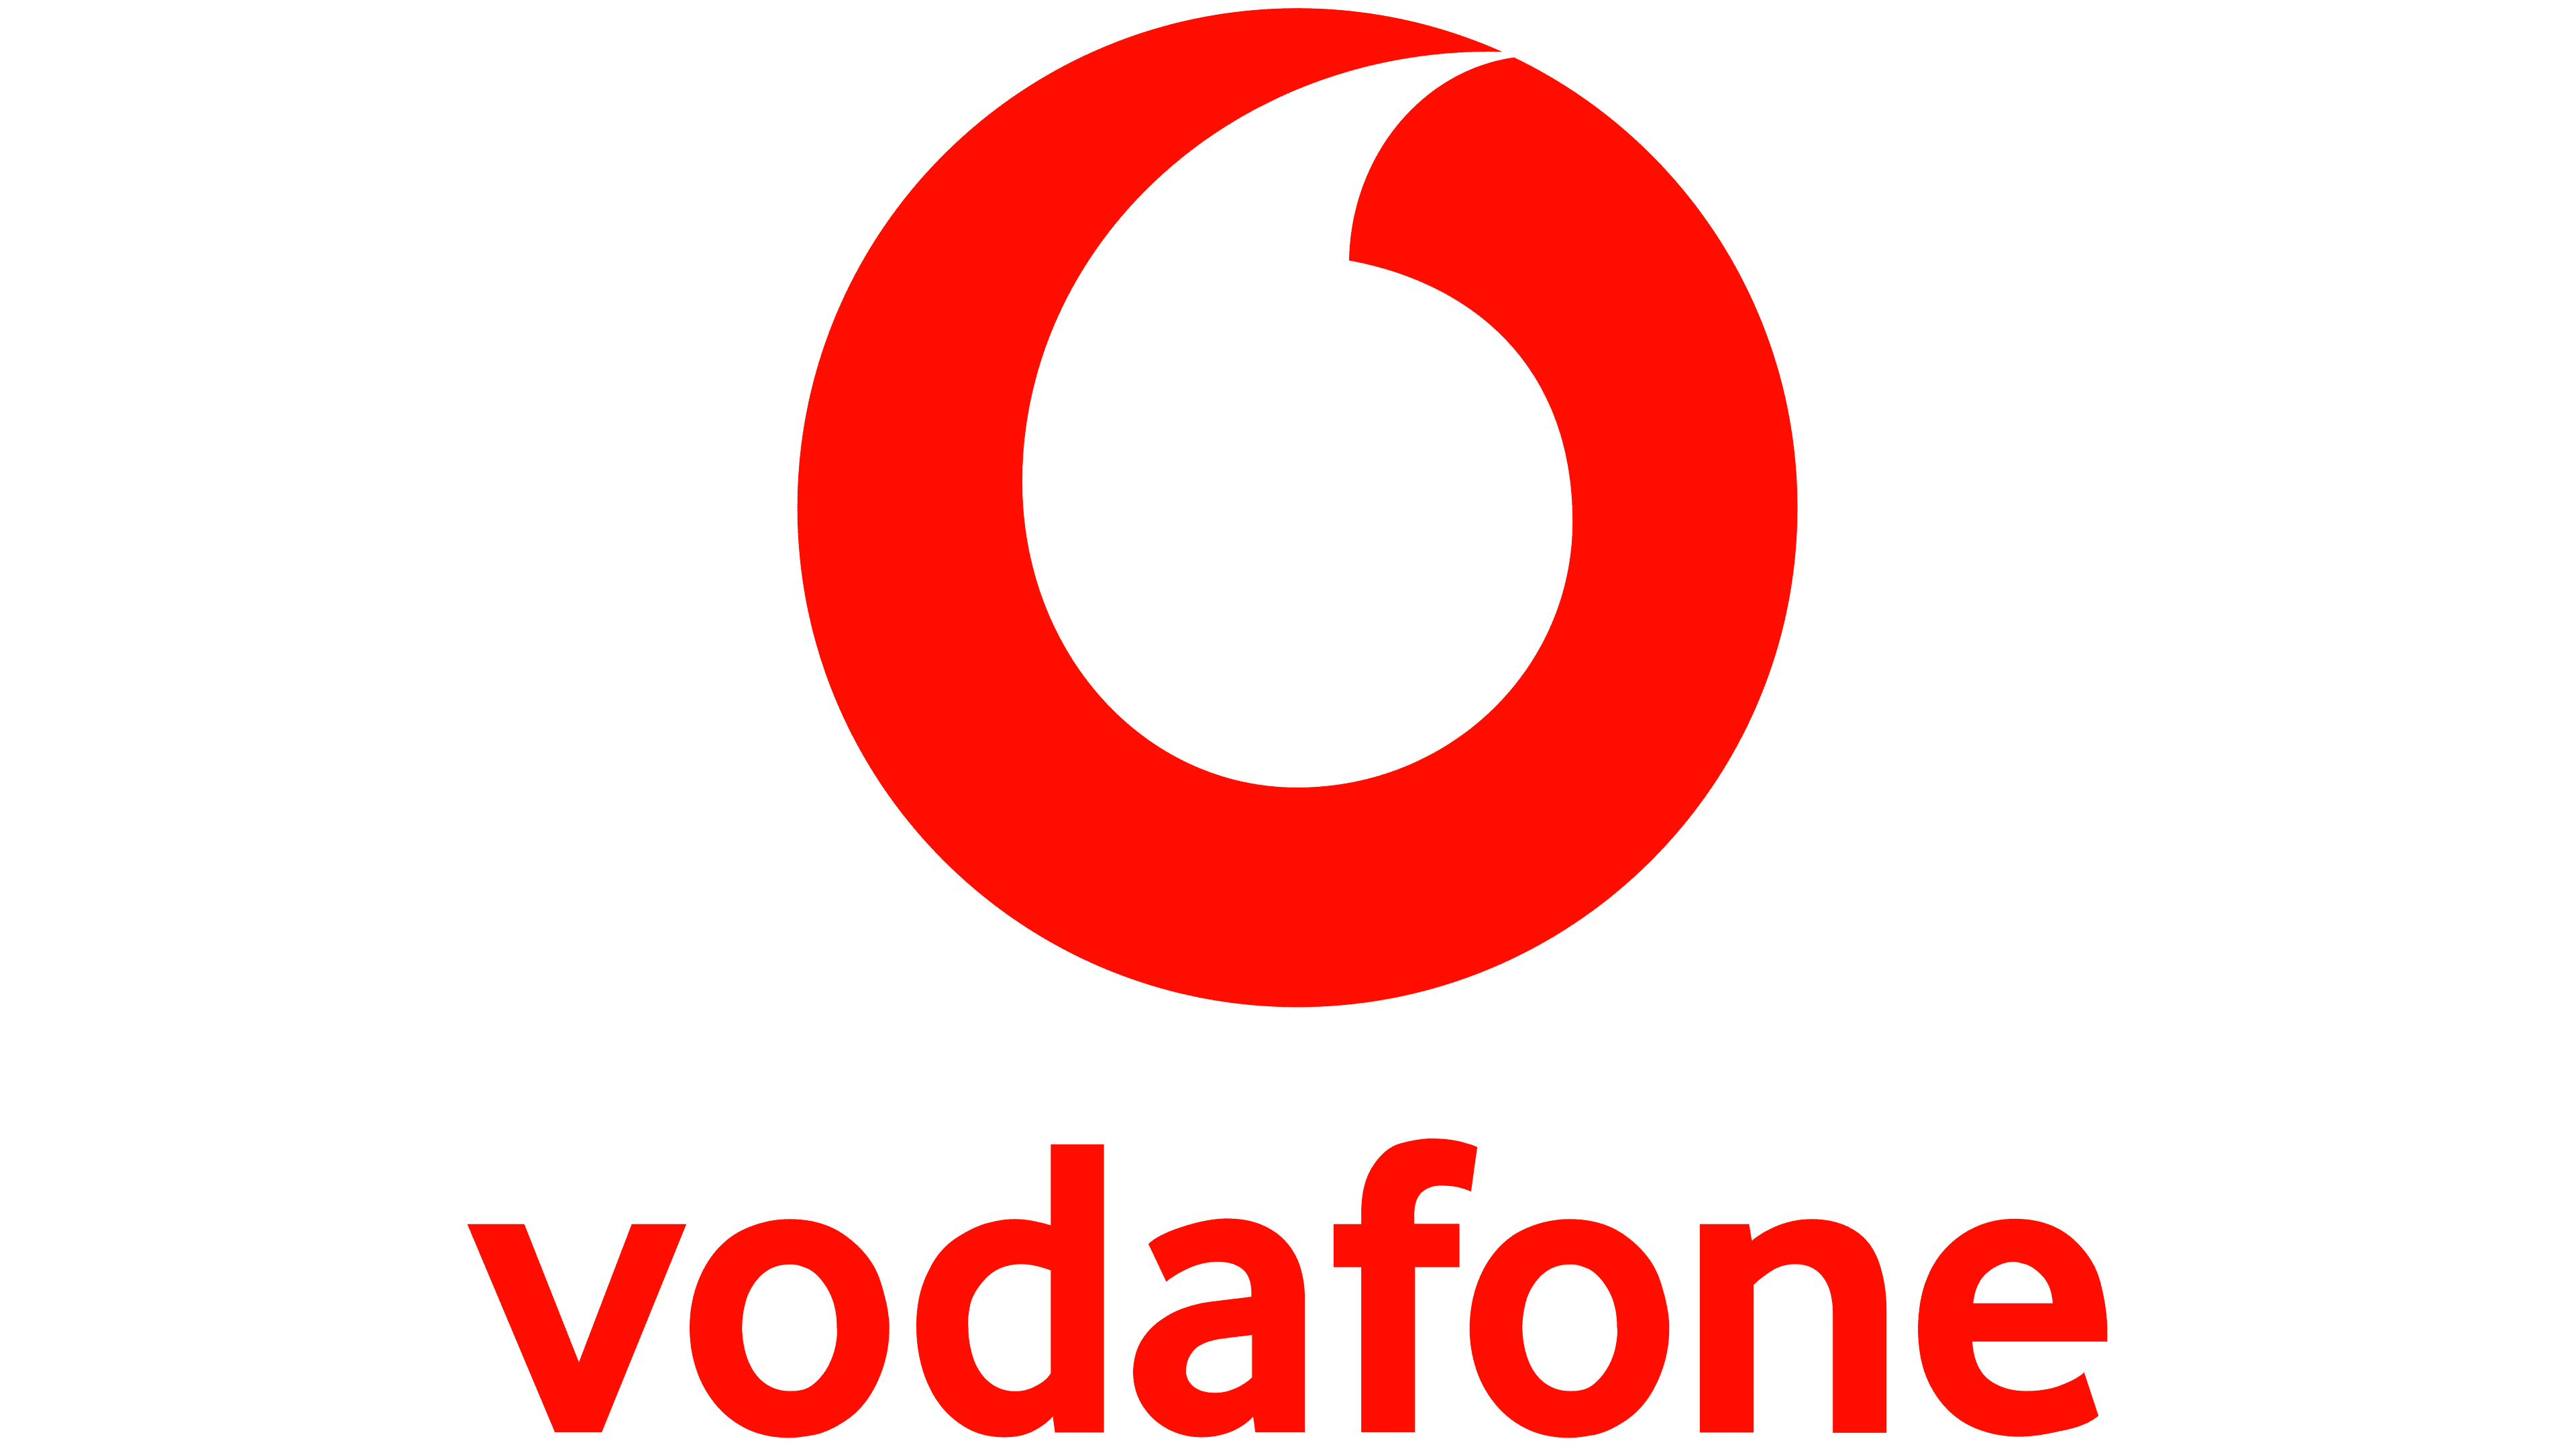 Vodafone To Rebrand In Hungary, Insiders Guess New Name